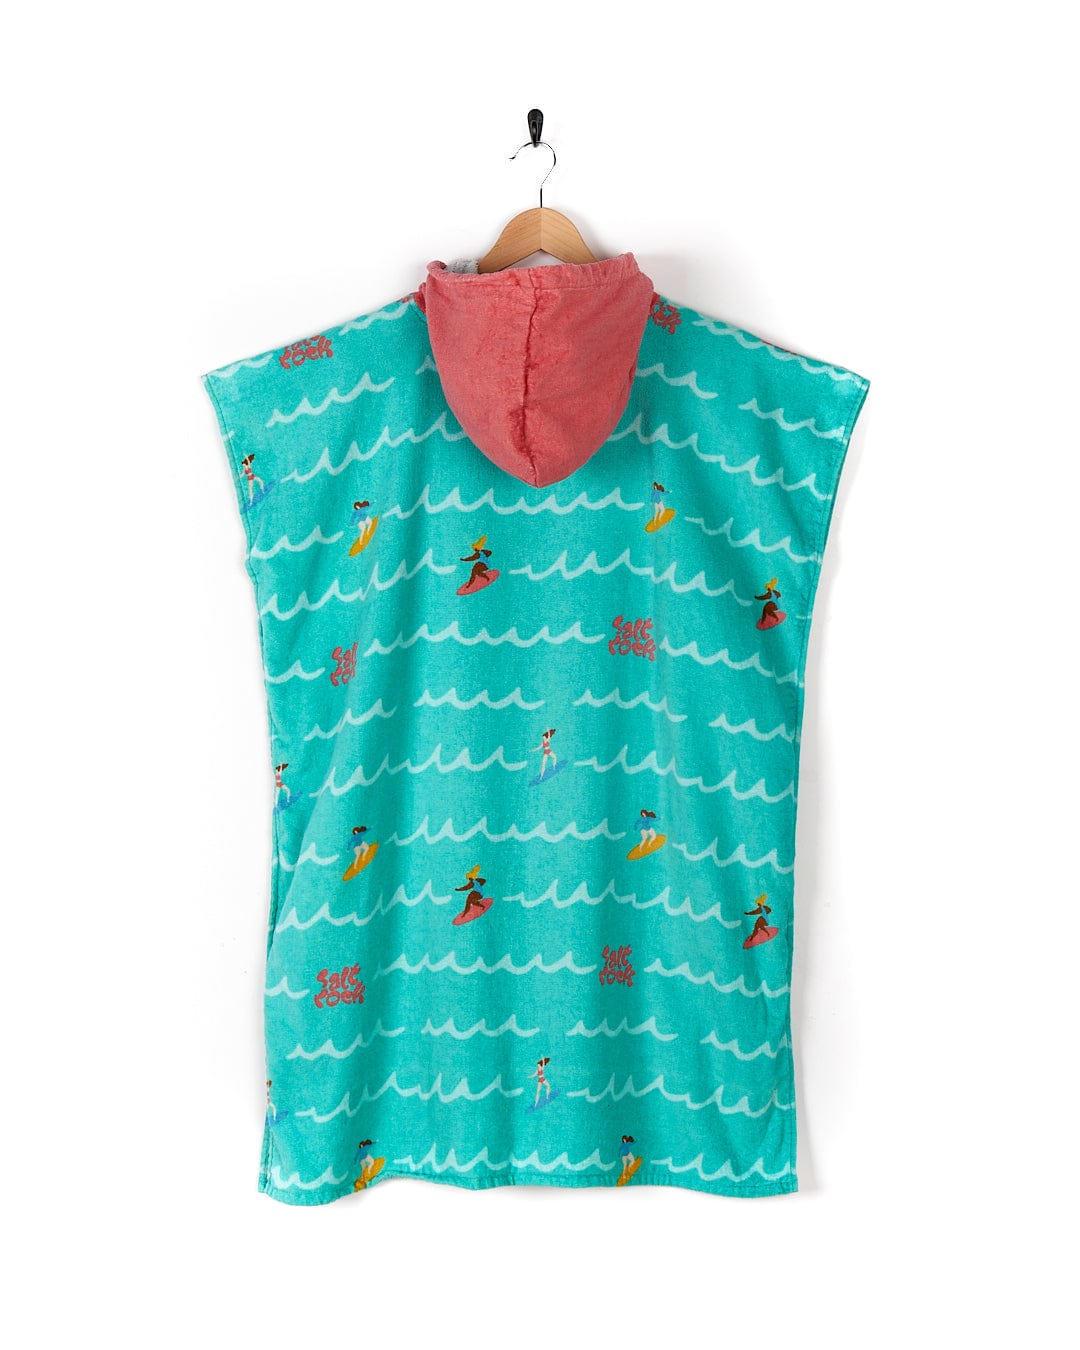 A Surf Sister - Kids Changing Towel - Turquoise poncho with a hood and waves on it.